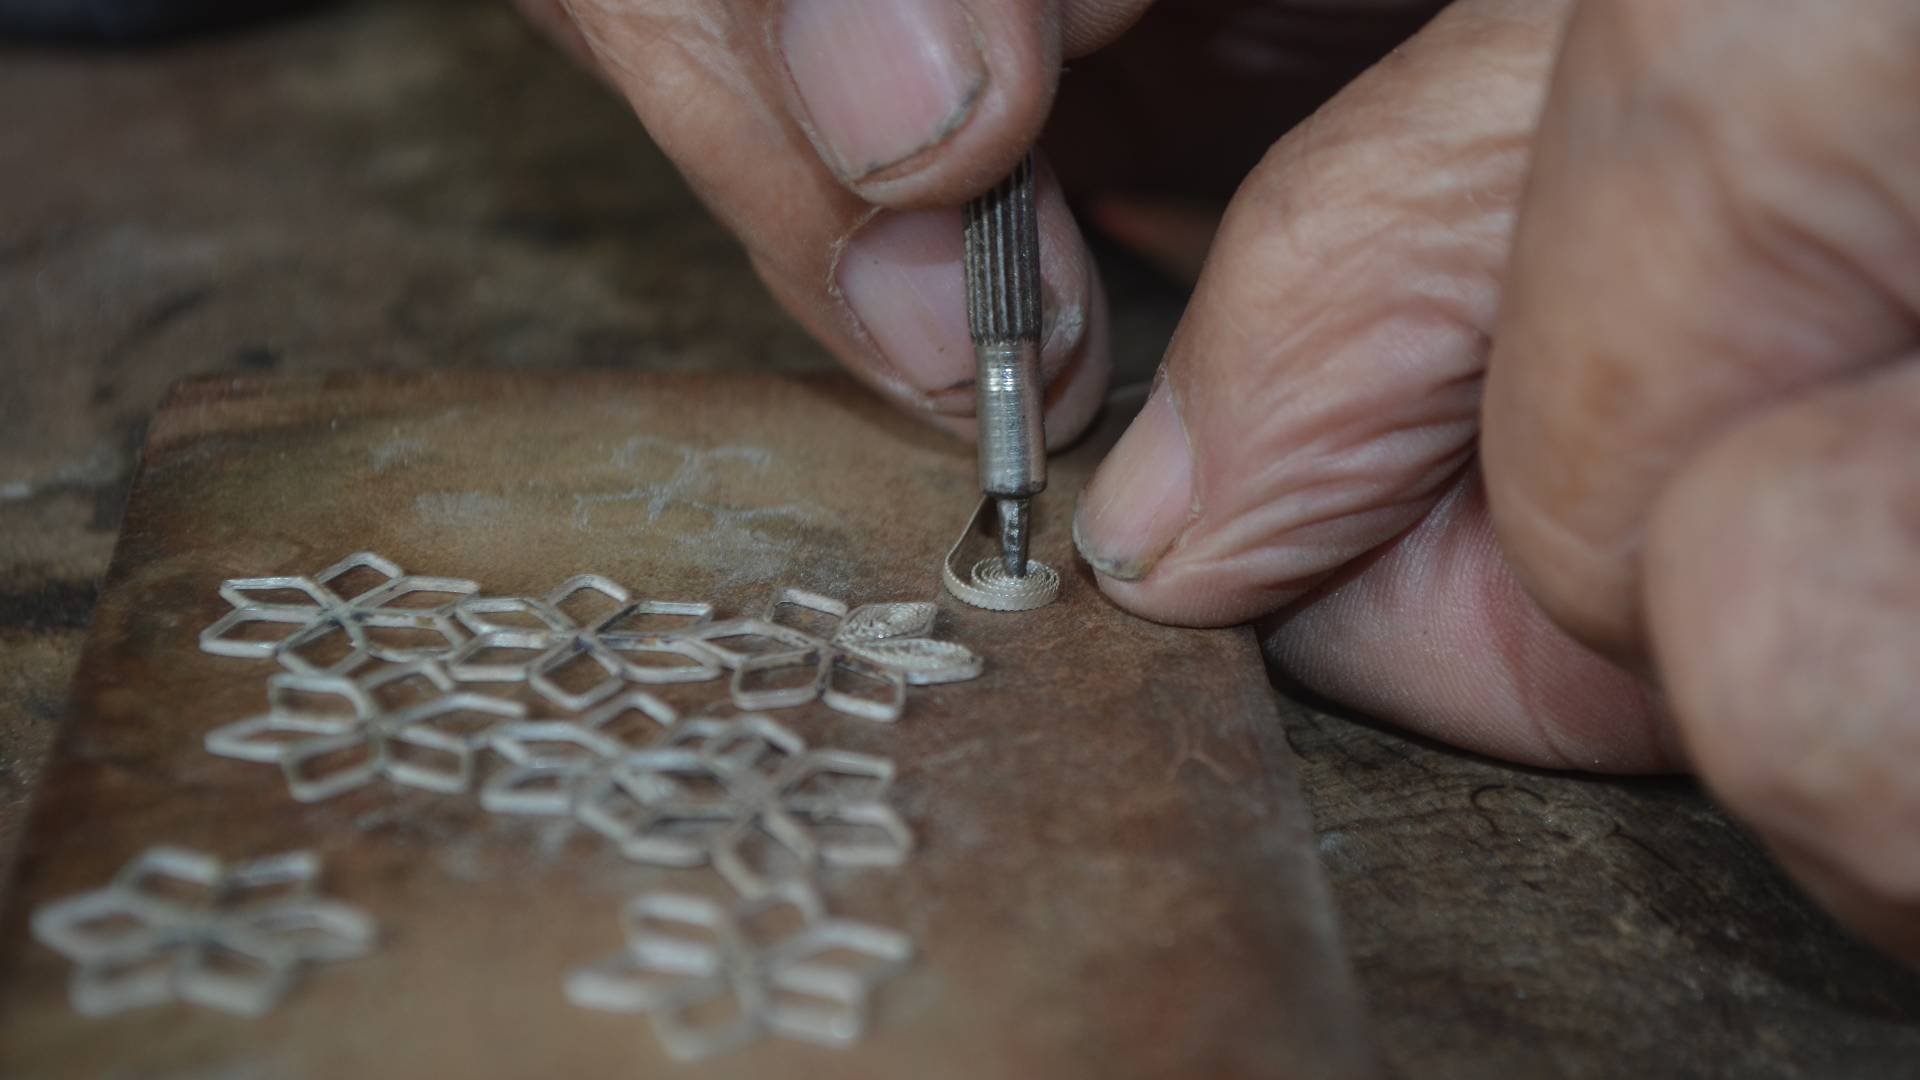 Close up of man's hands working with filigree tool